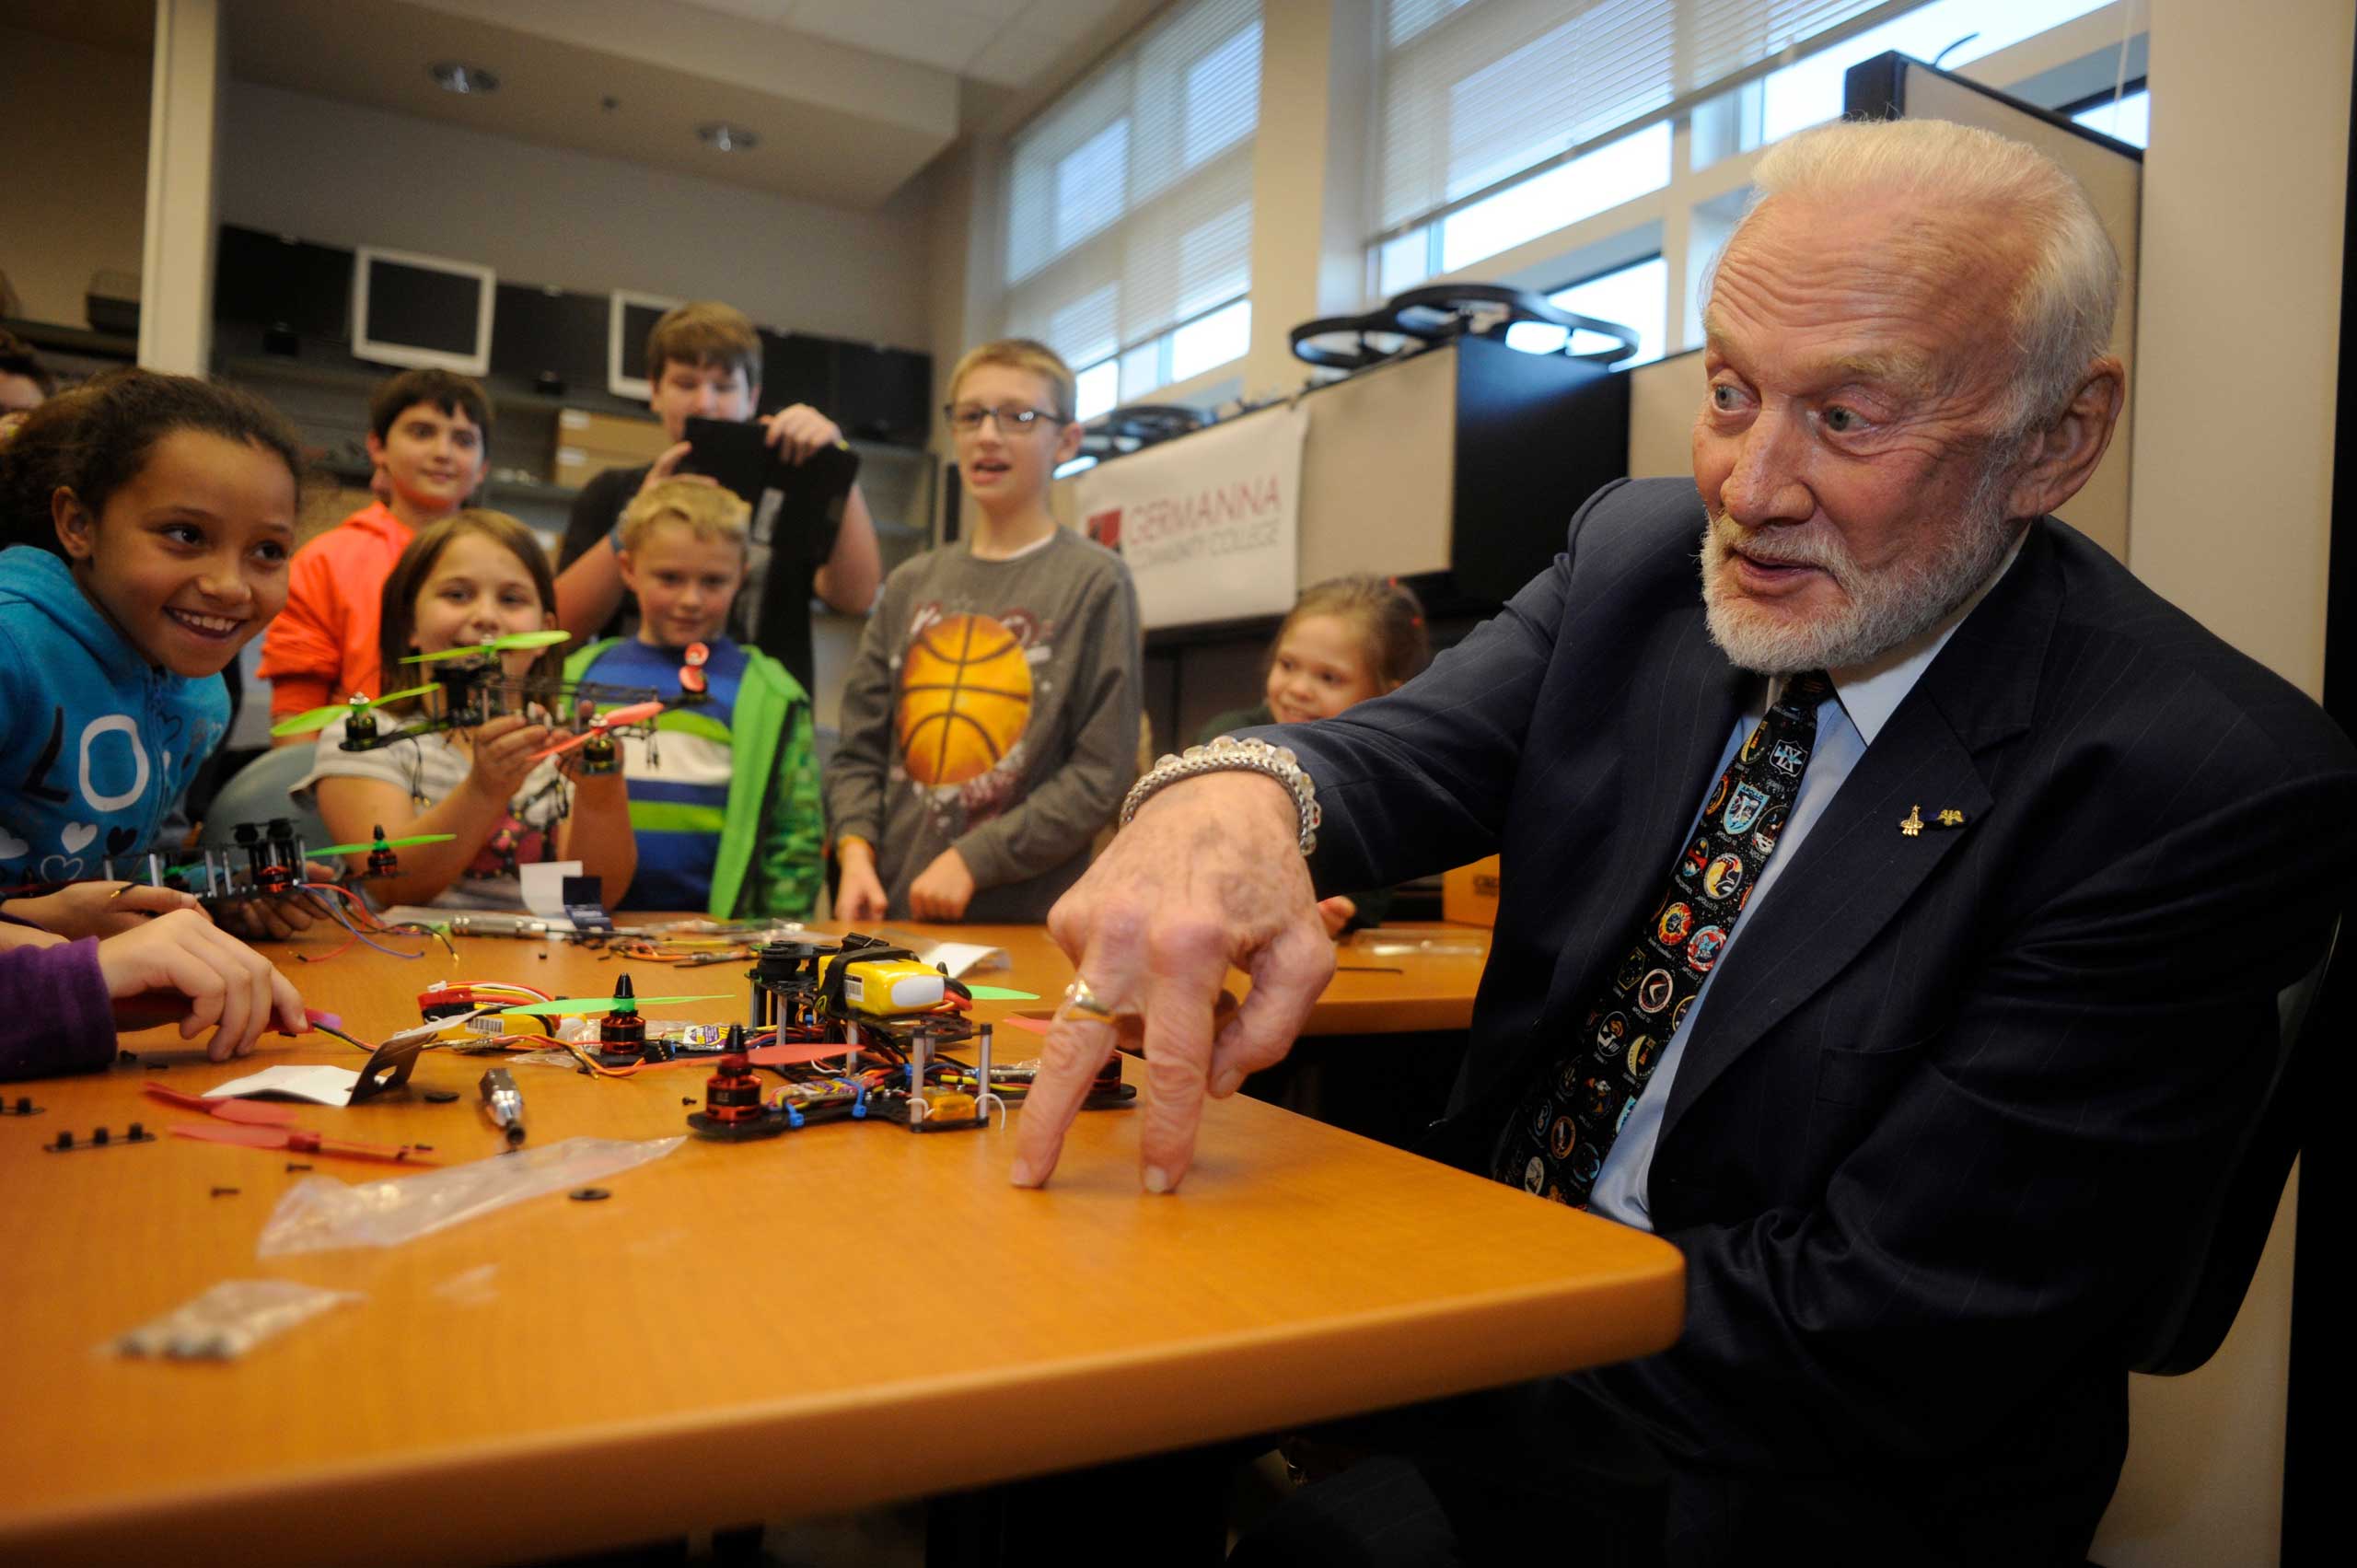 Aldrin frequently speaks to students about his experiences as an astronaut. He is seen here taking to students from the Madison and Orange Boys and Girls Clubs on Nov. 7, 2014, in Culpeper, Va.